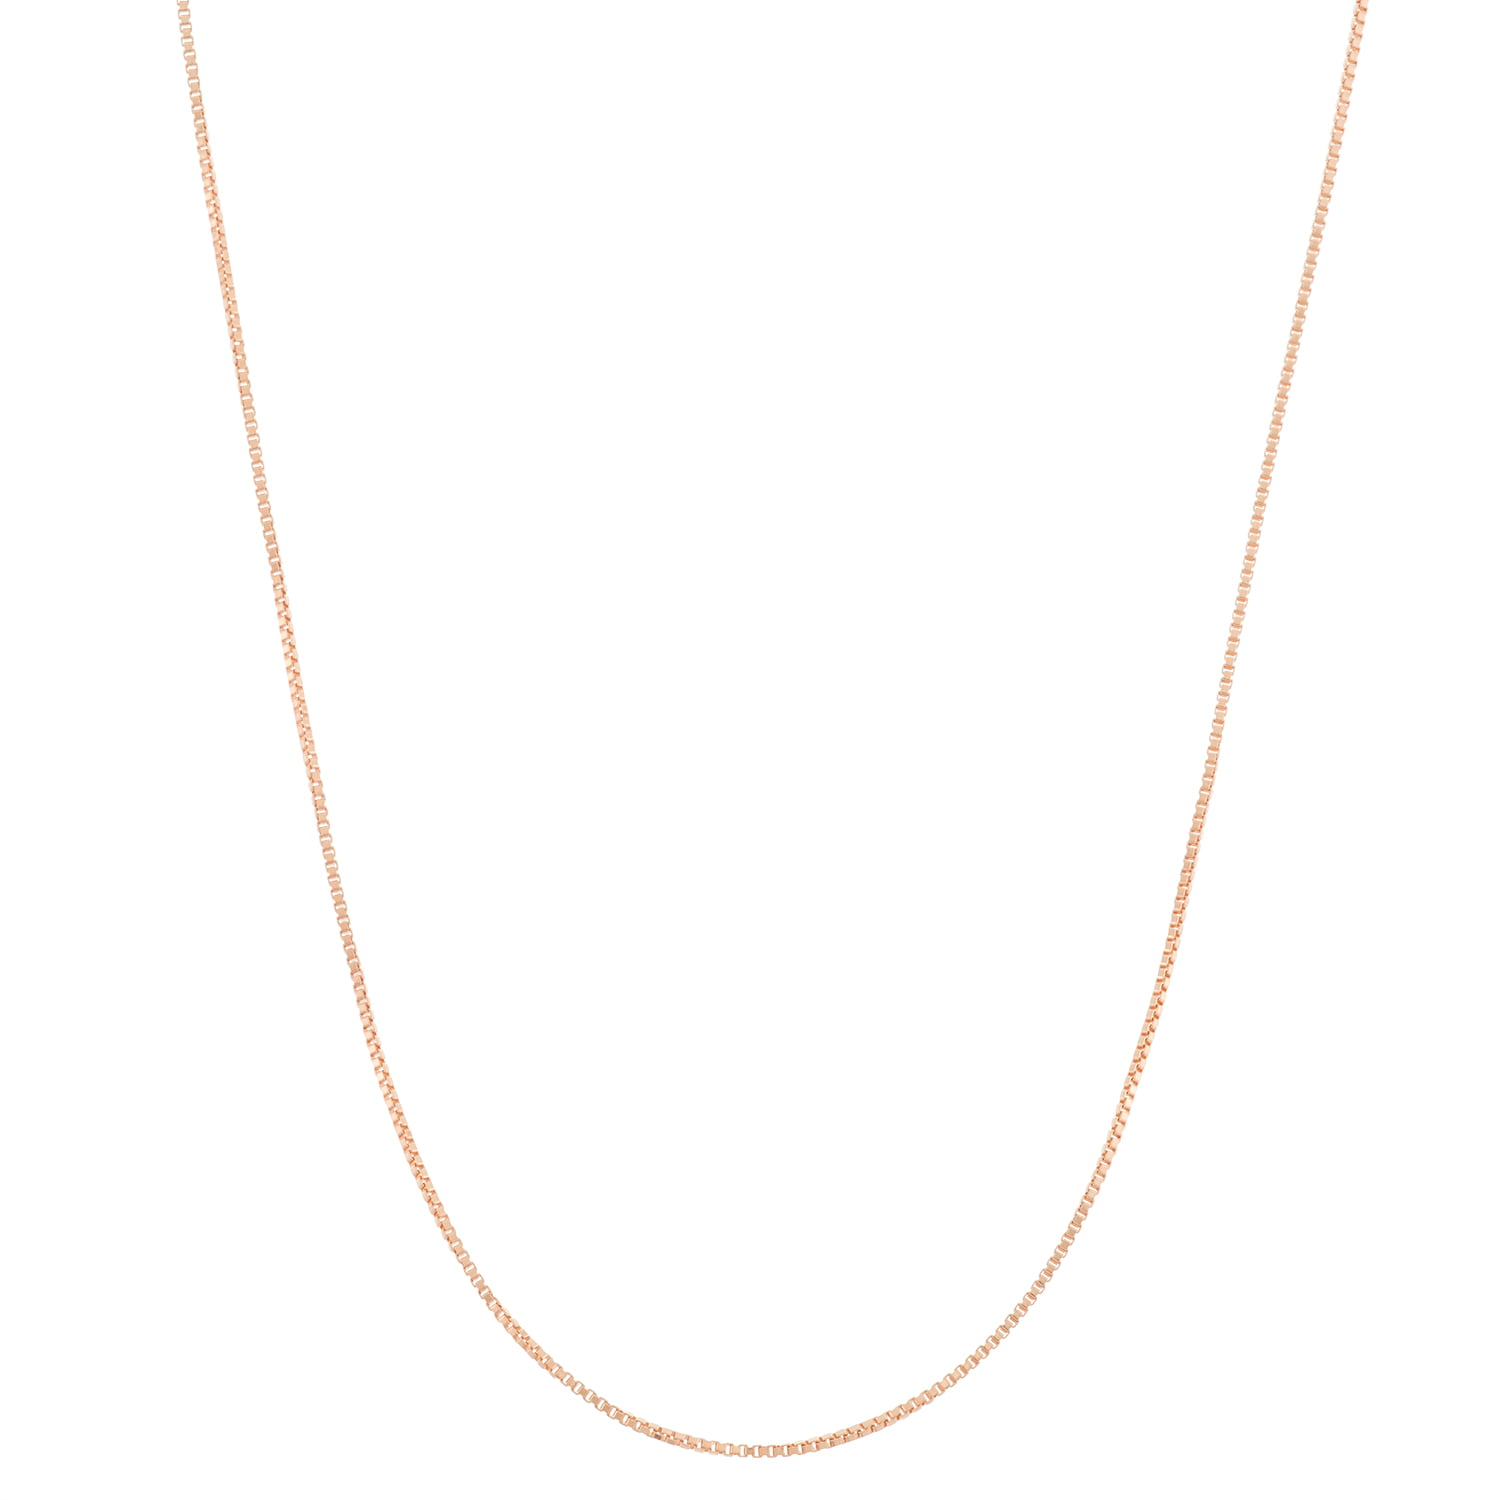 Rose Gold Dipped Sterling Silver Fine Diamond Cut Chain 16-22 Inches